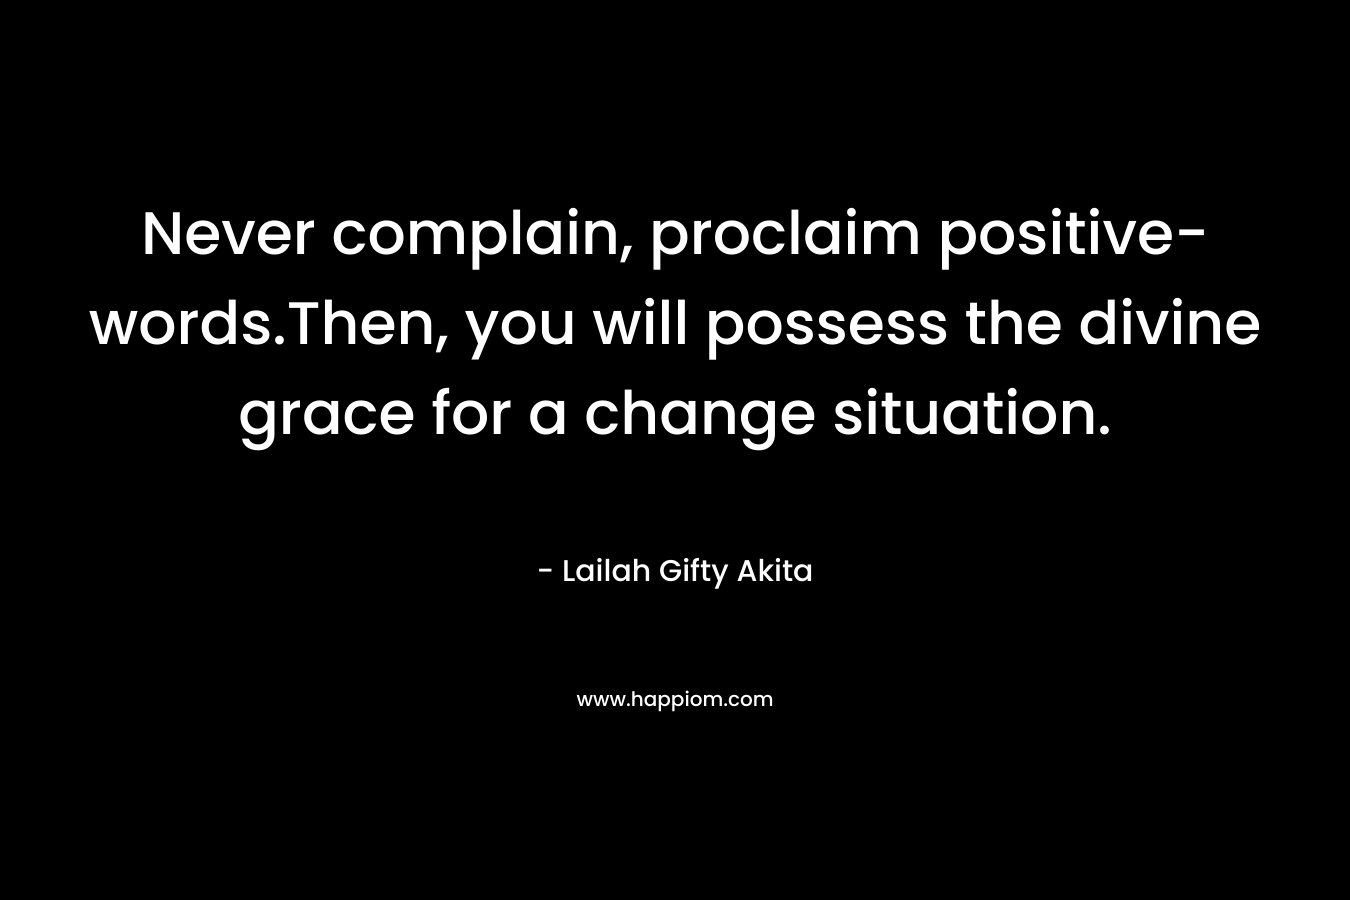 Never complain, proclaim positive-words.Then, you will possess the divine grace for a change situation.